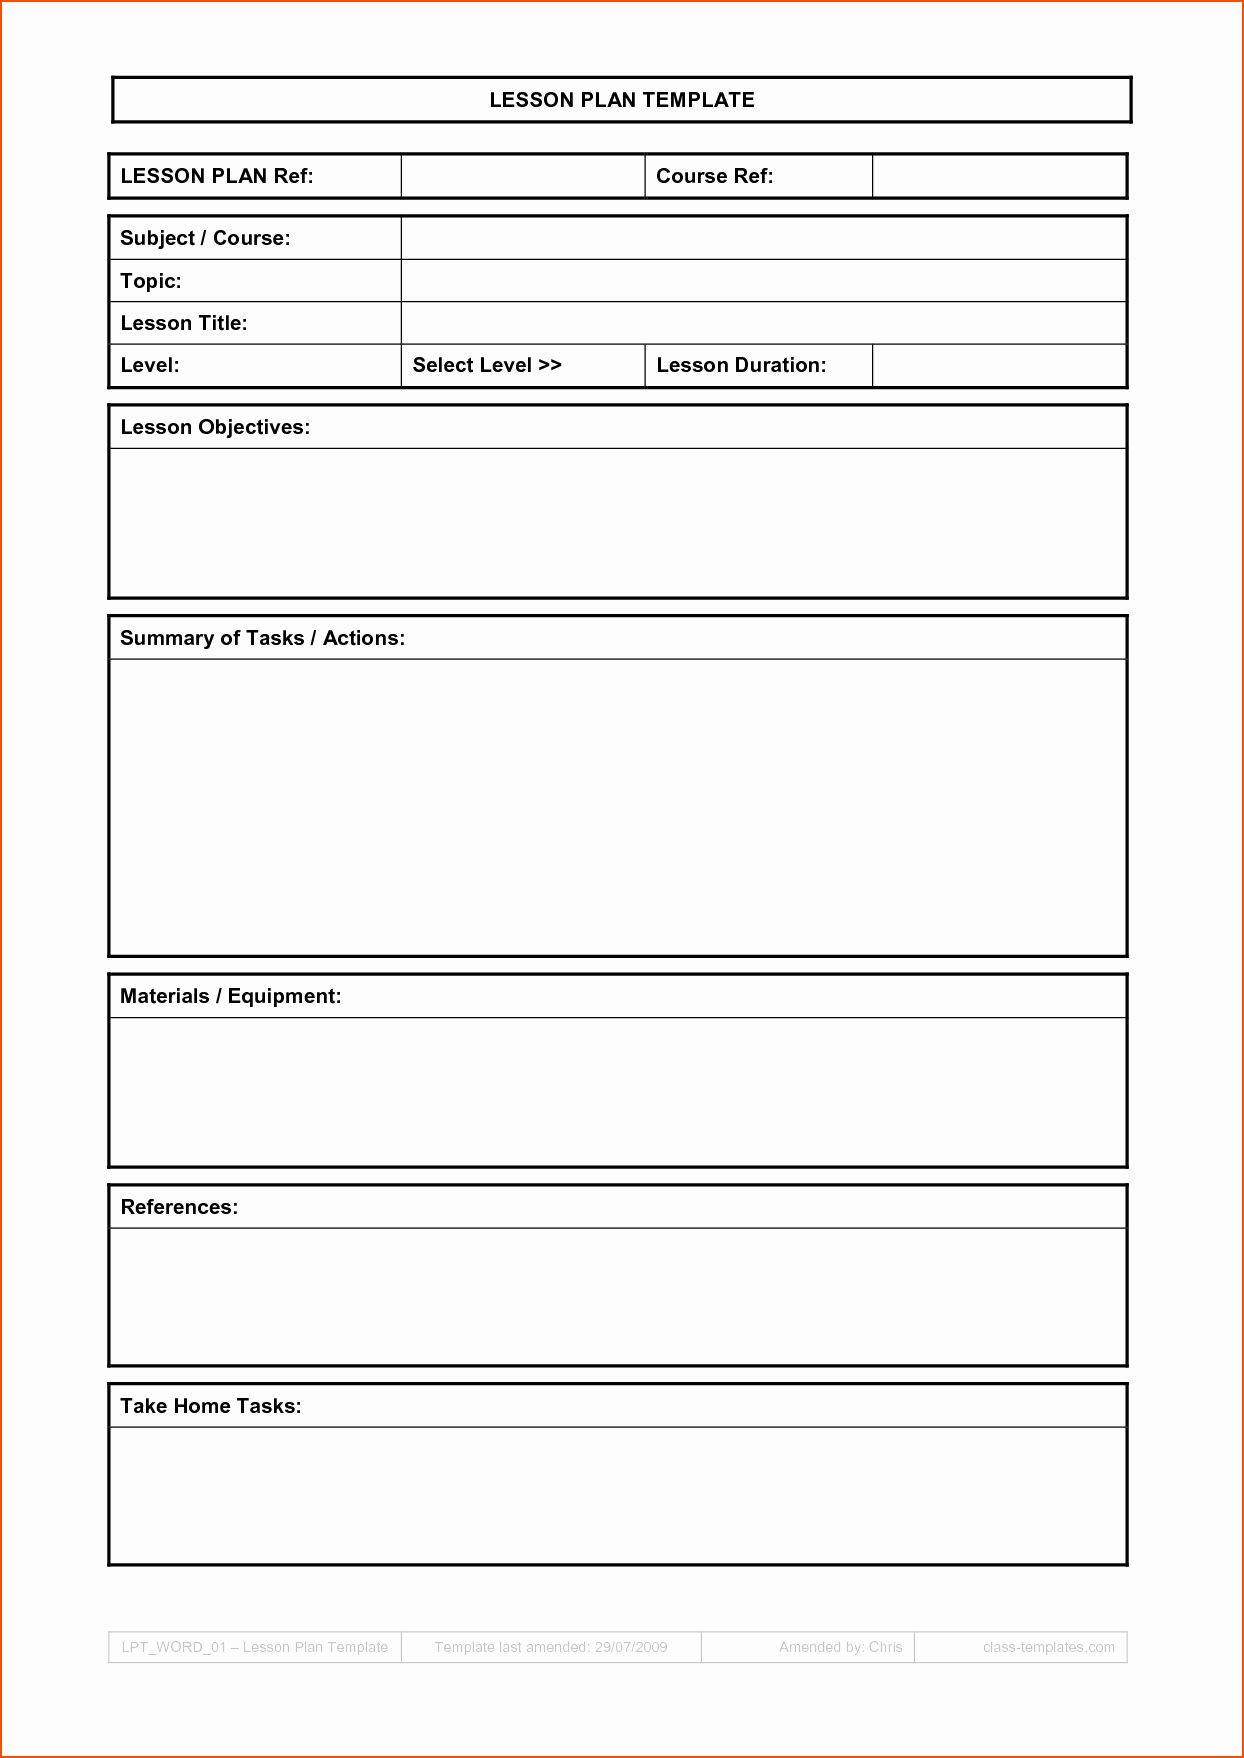 Lesson Plan Template Free Printable Awesome 5 Basic Lesson Plan Template Bookletemplate